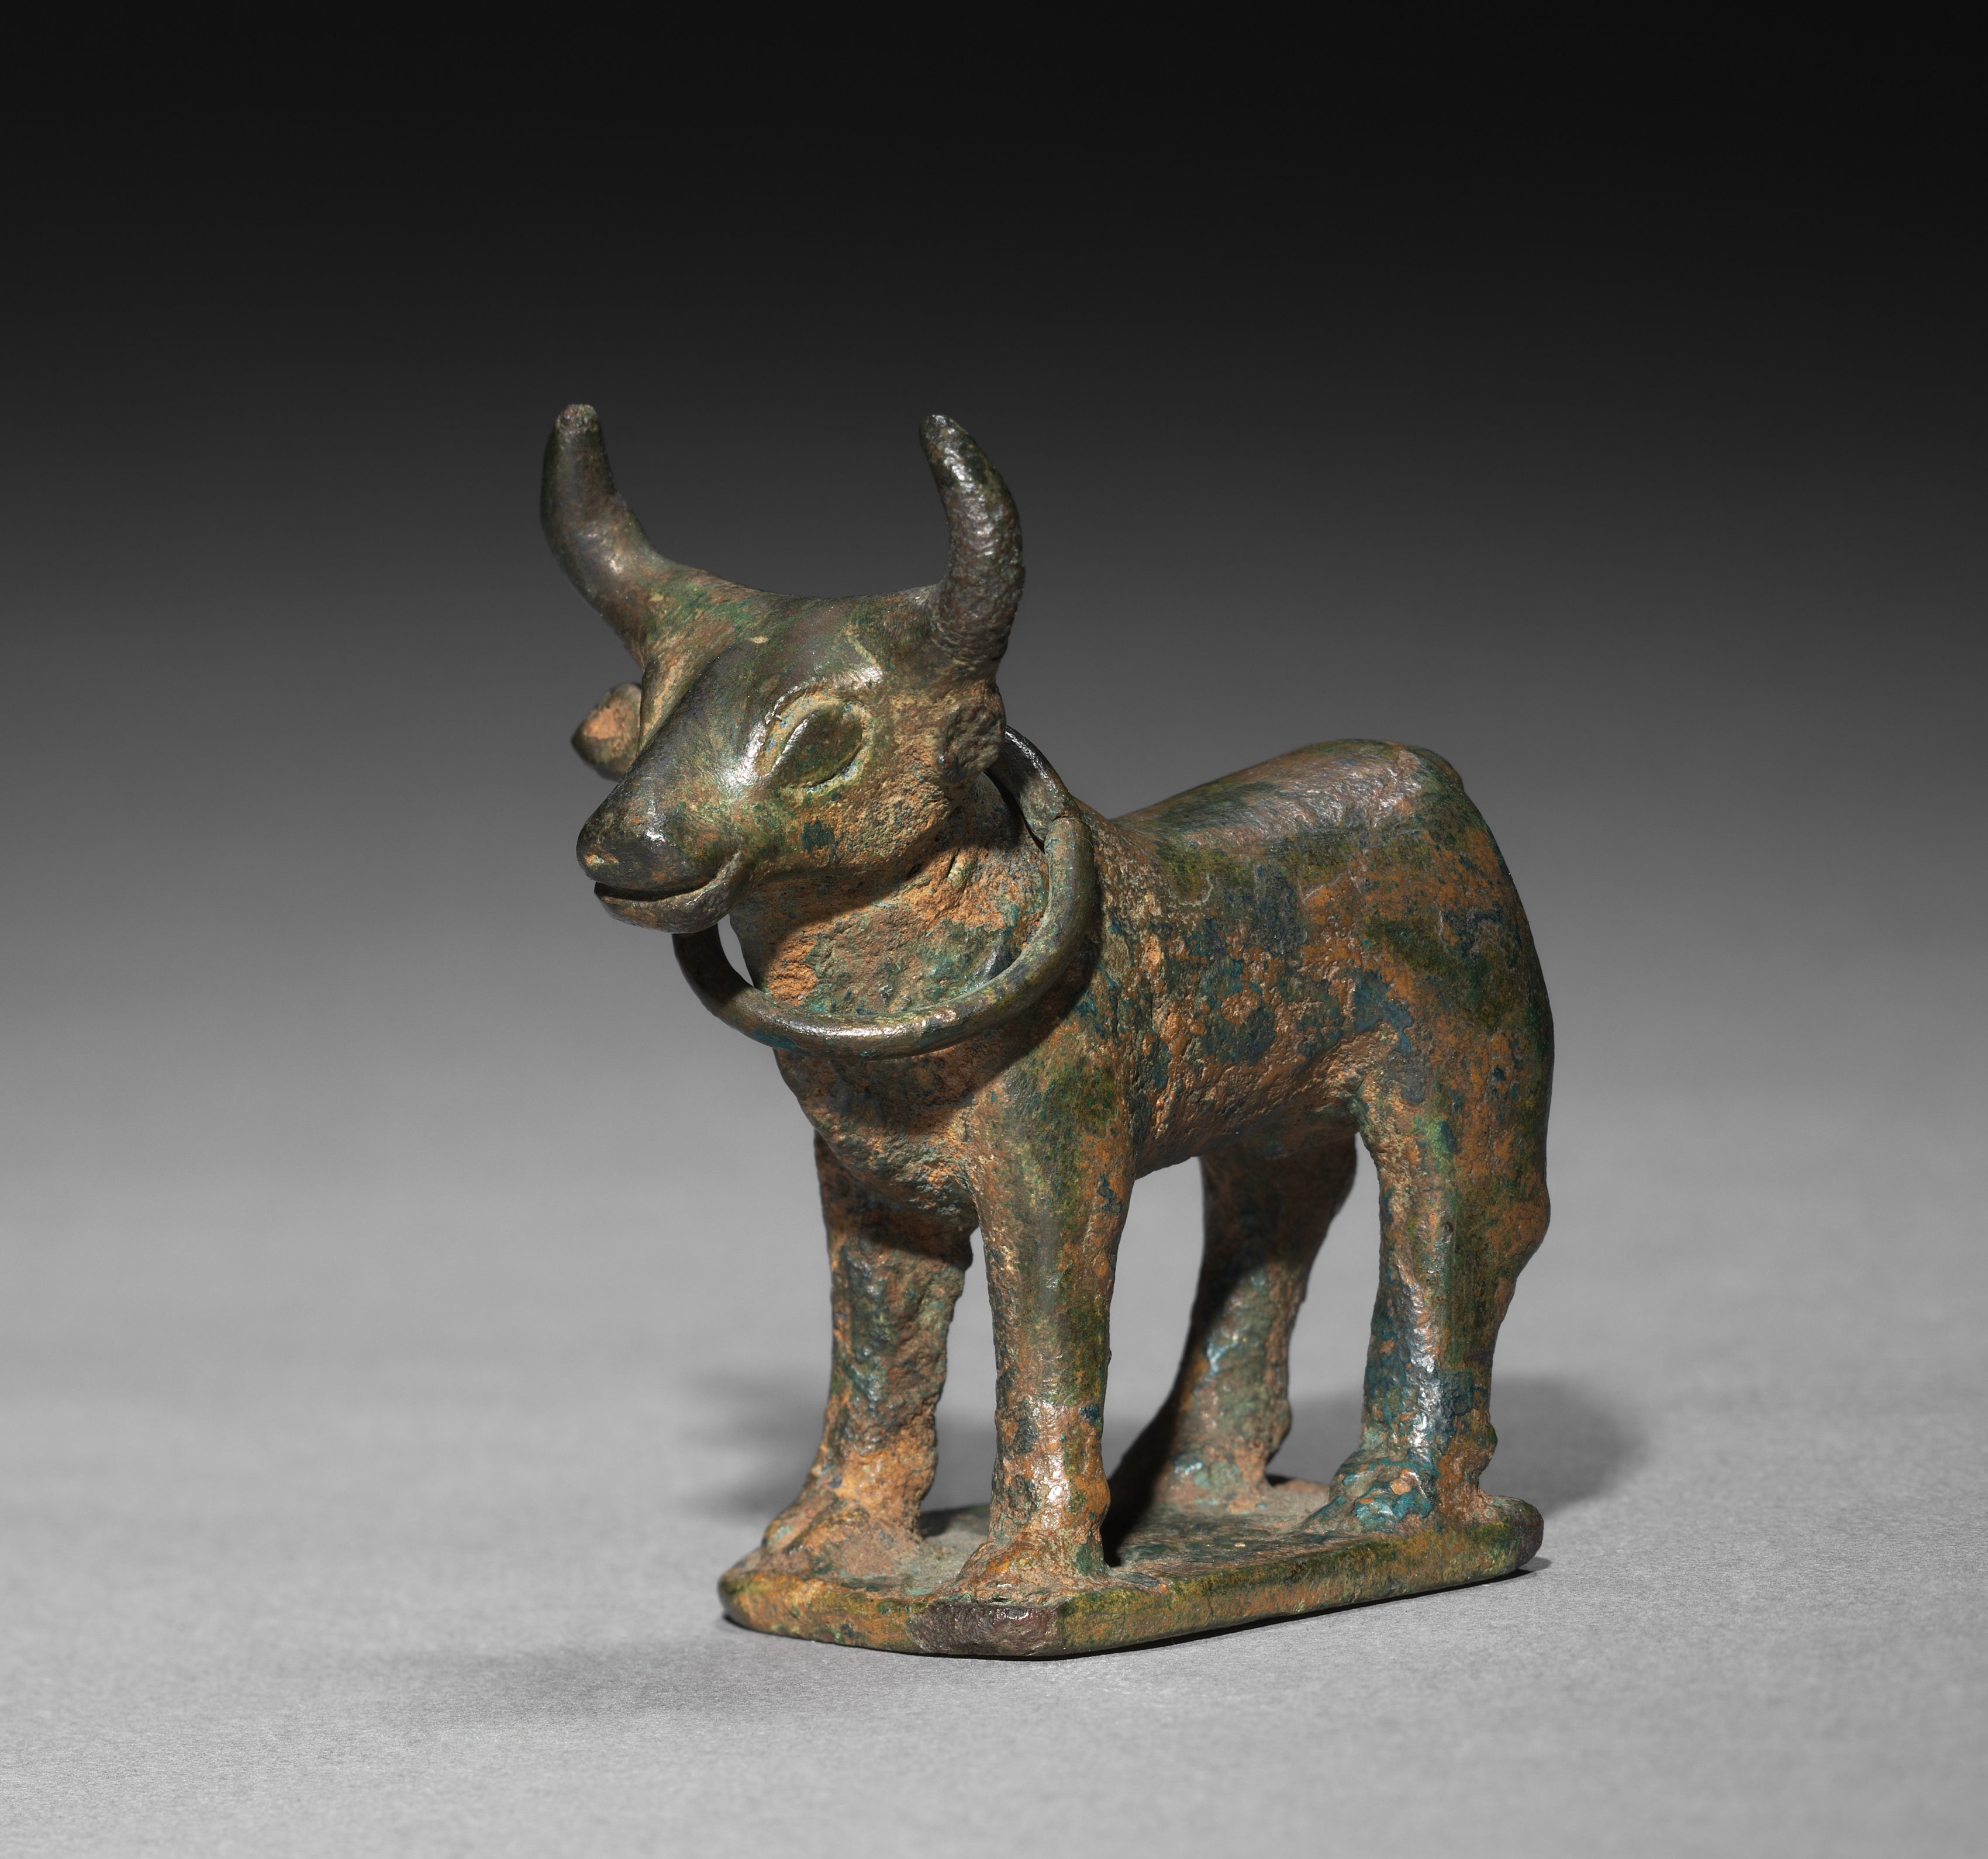 Statuette of a Bull with Curved Horns